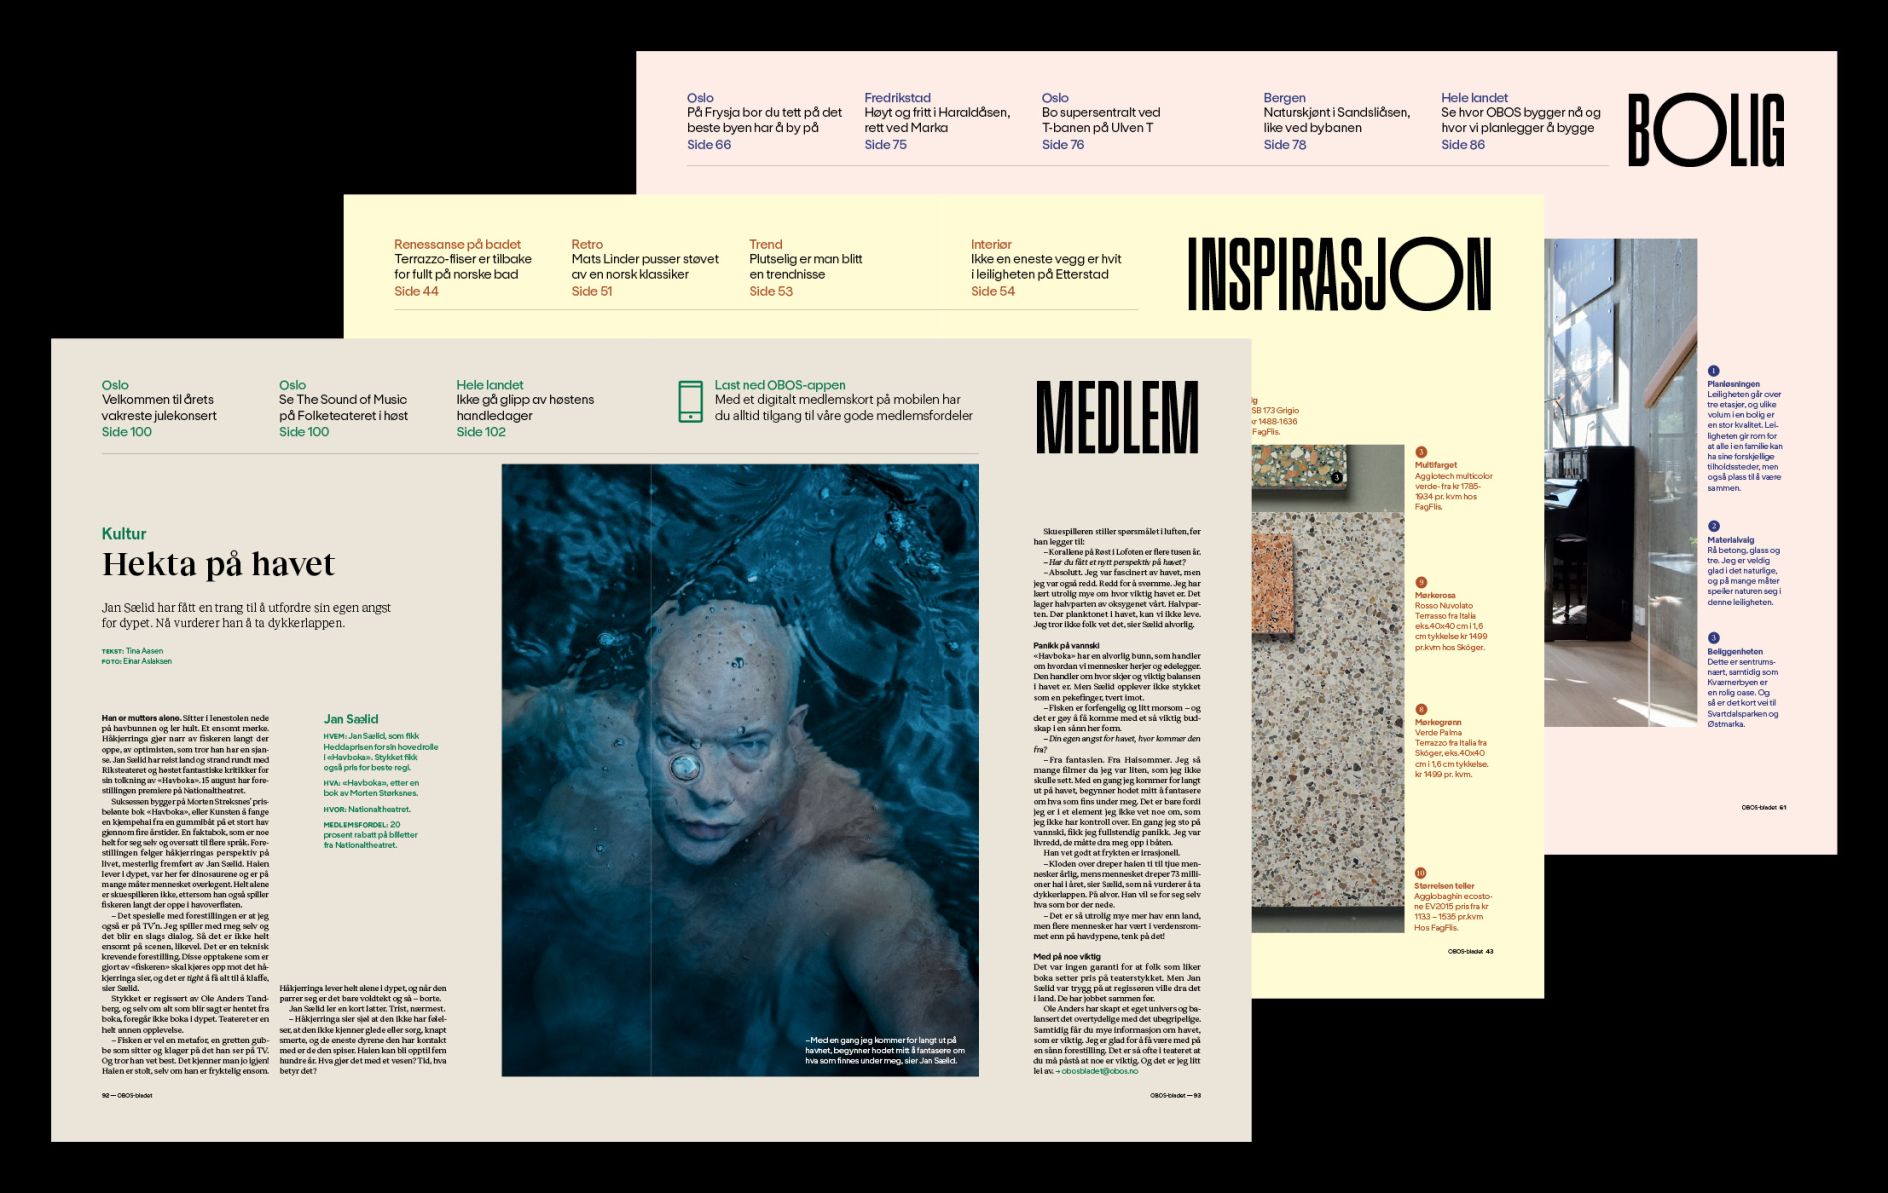 Magazine redesign by Bielke&Yang brings the past back to the future | Creative Boom